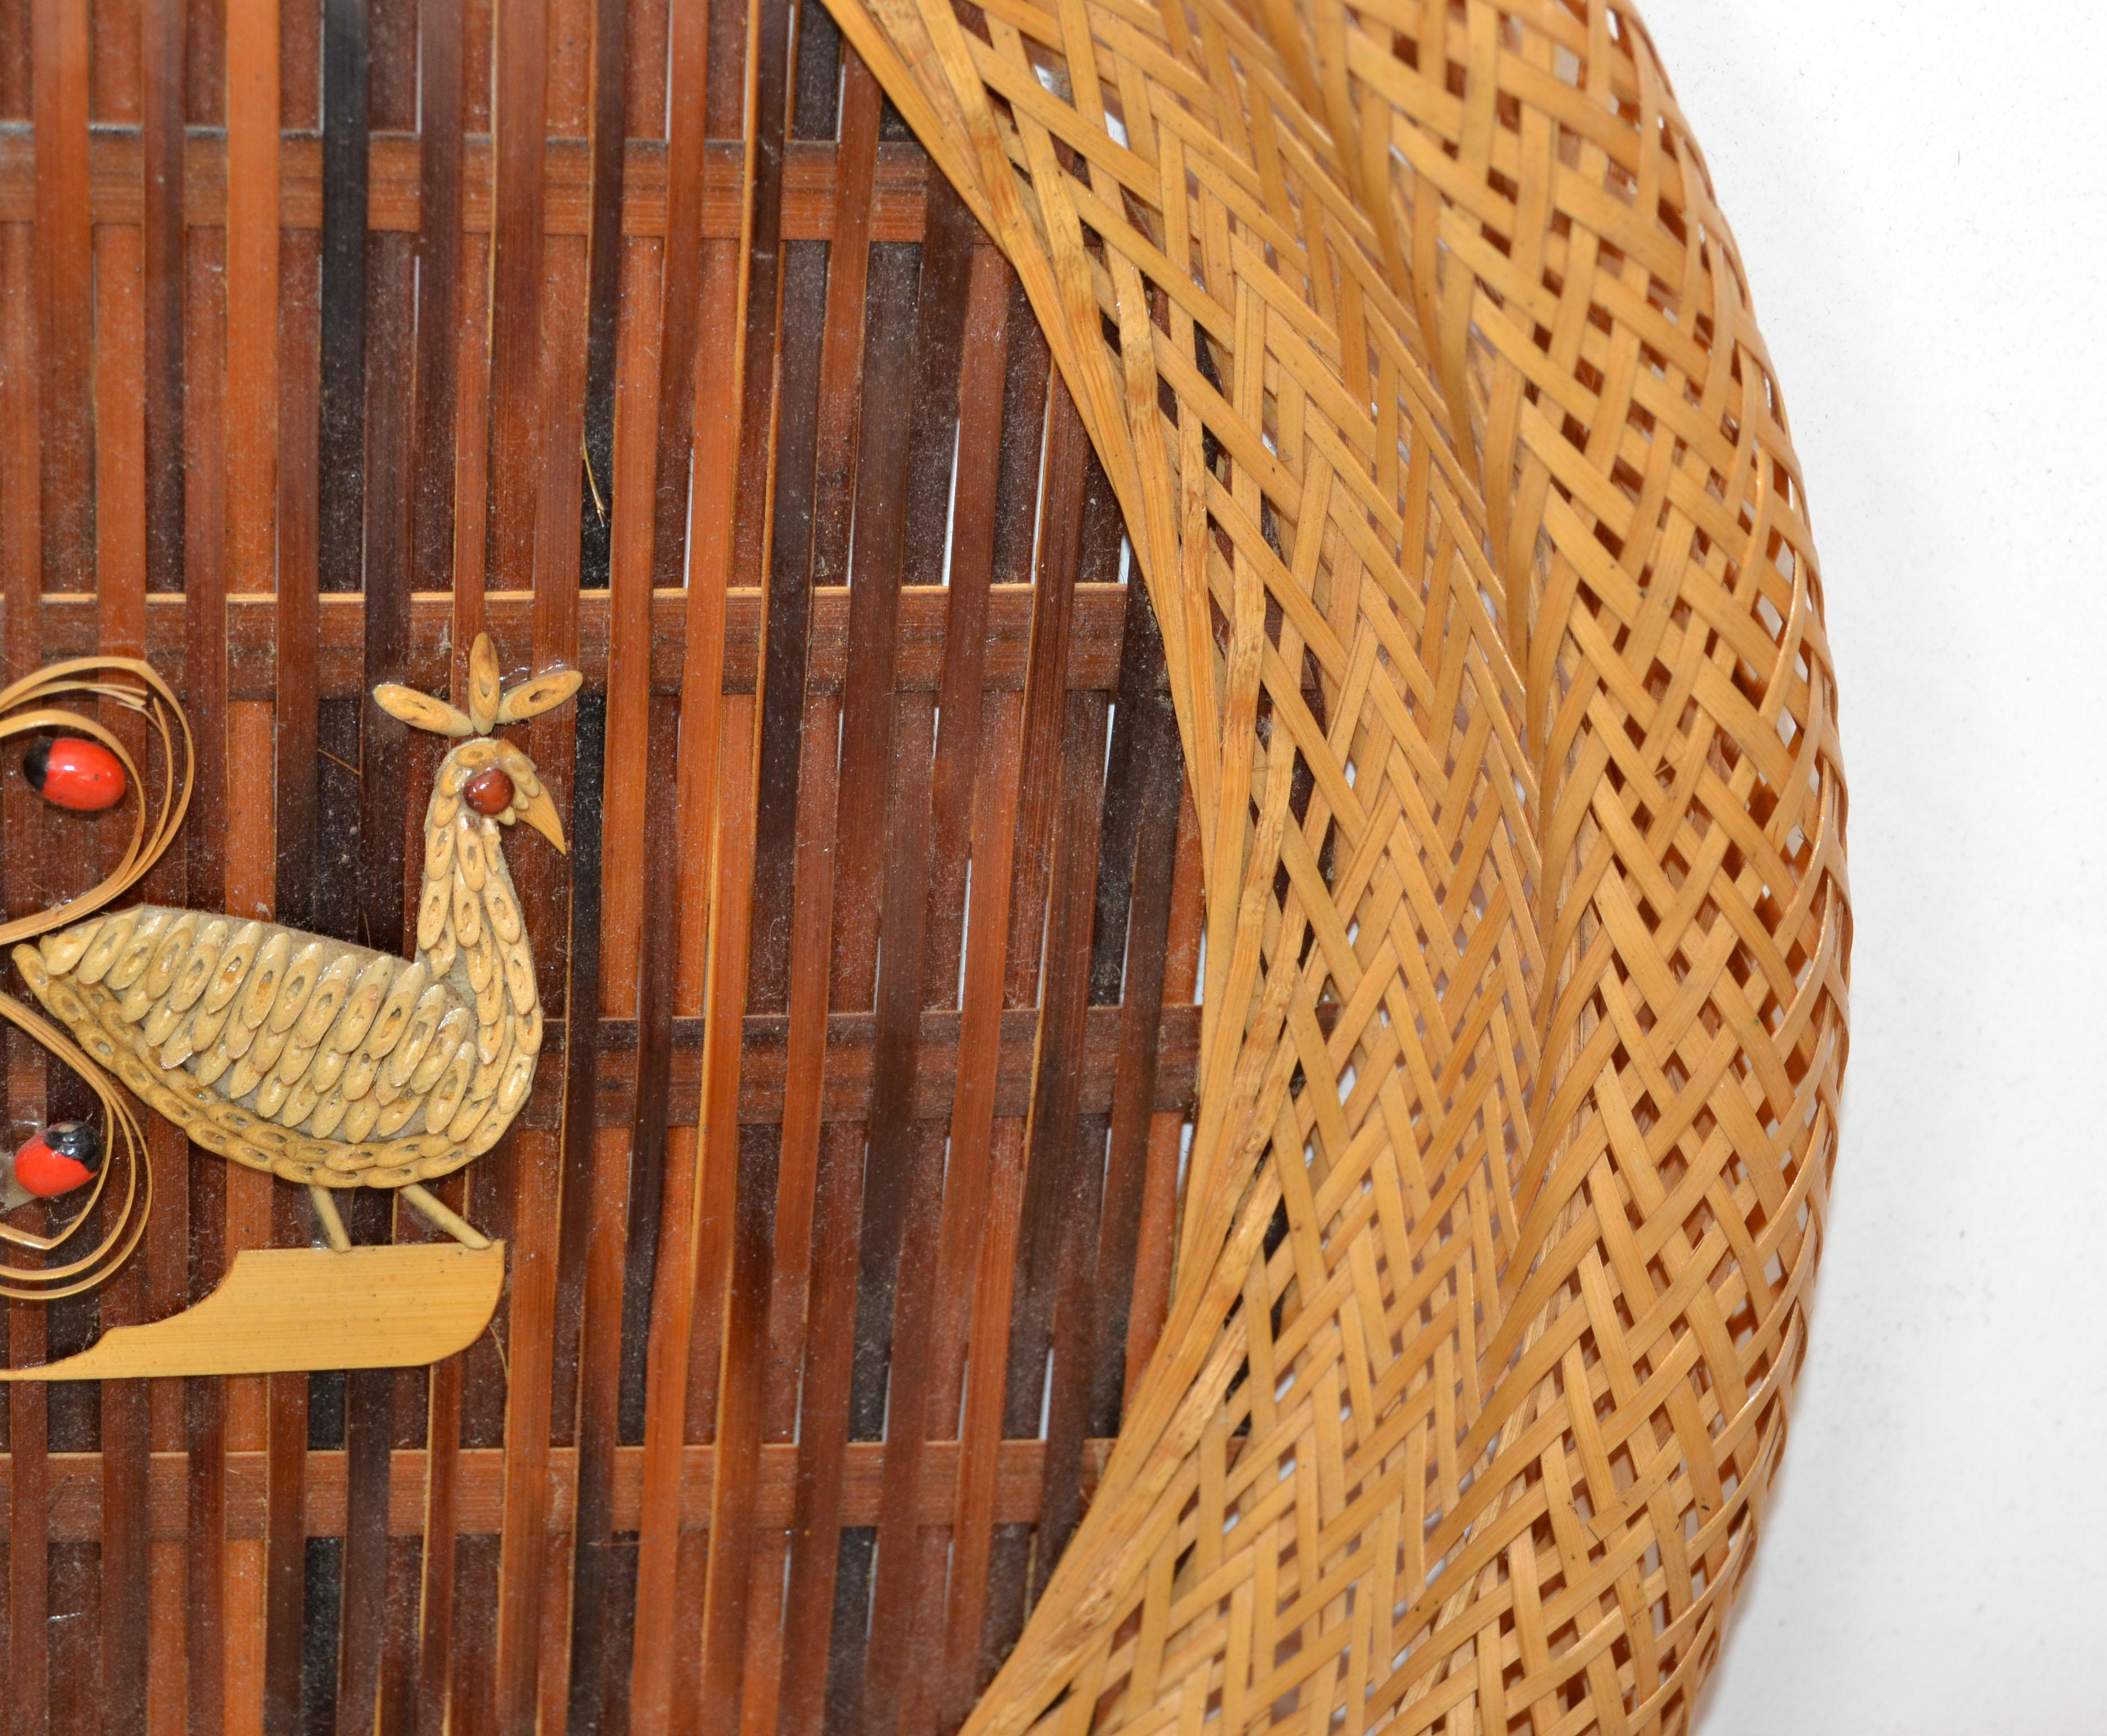 Folk Art 3 Nesting Decorative Handcrafted Cane & Rattan Beaded Wall Plates Peacock Motif For Sale